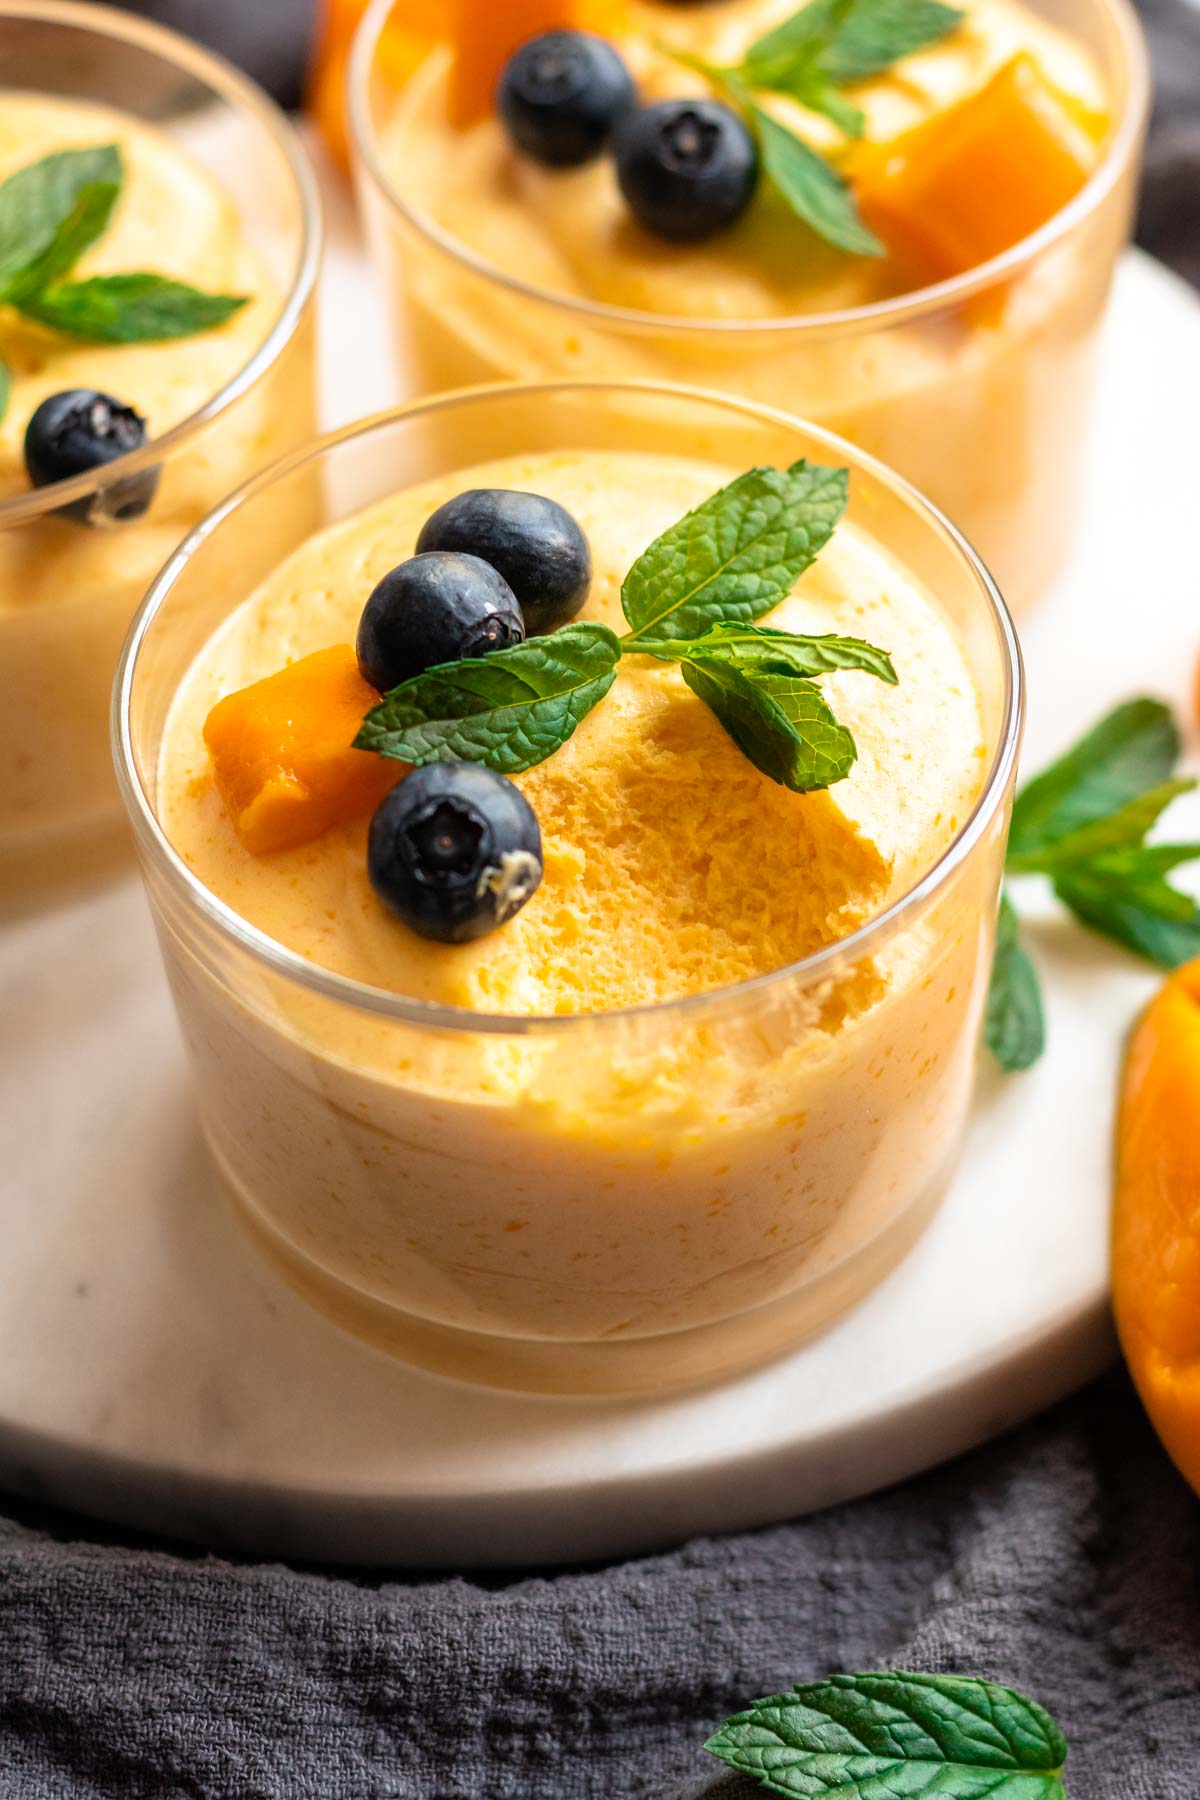 Mango mousse with a bite missing.